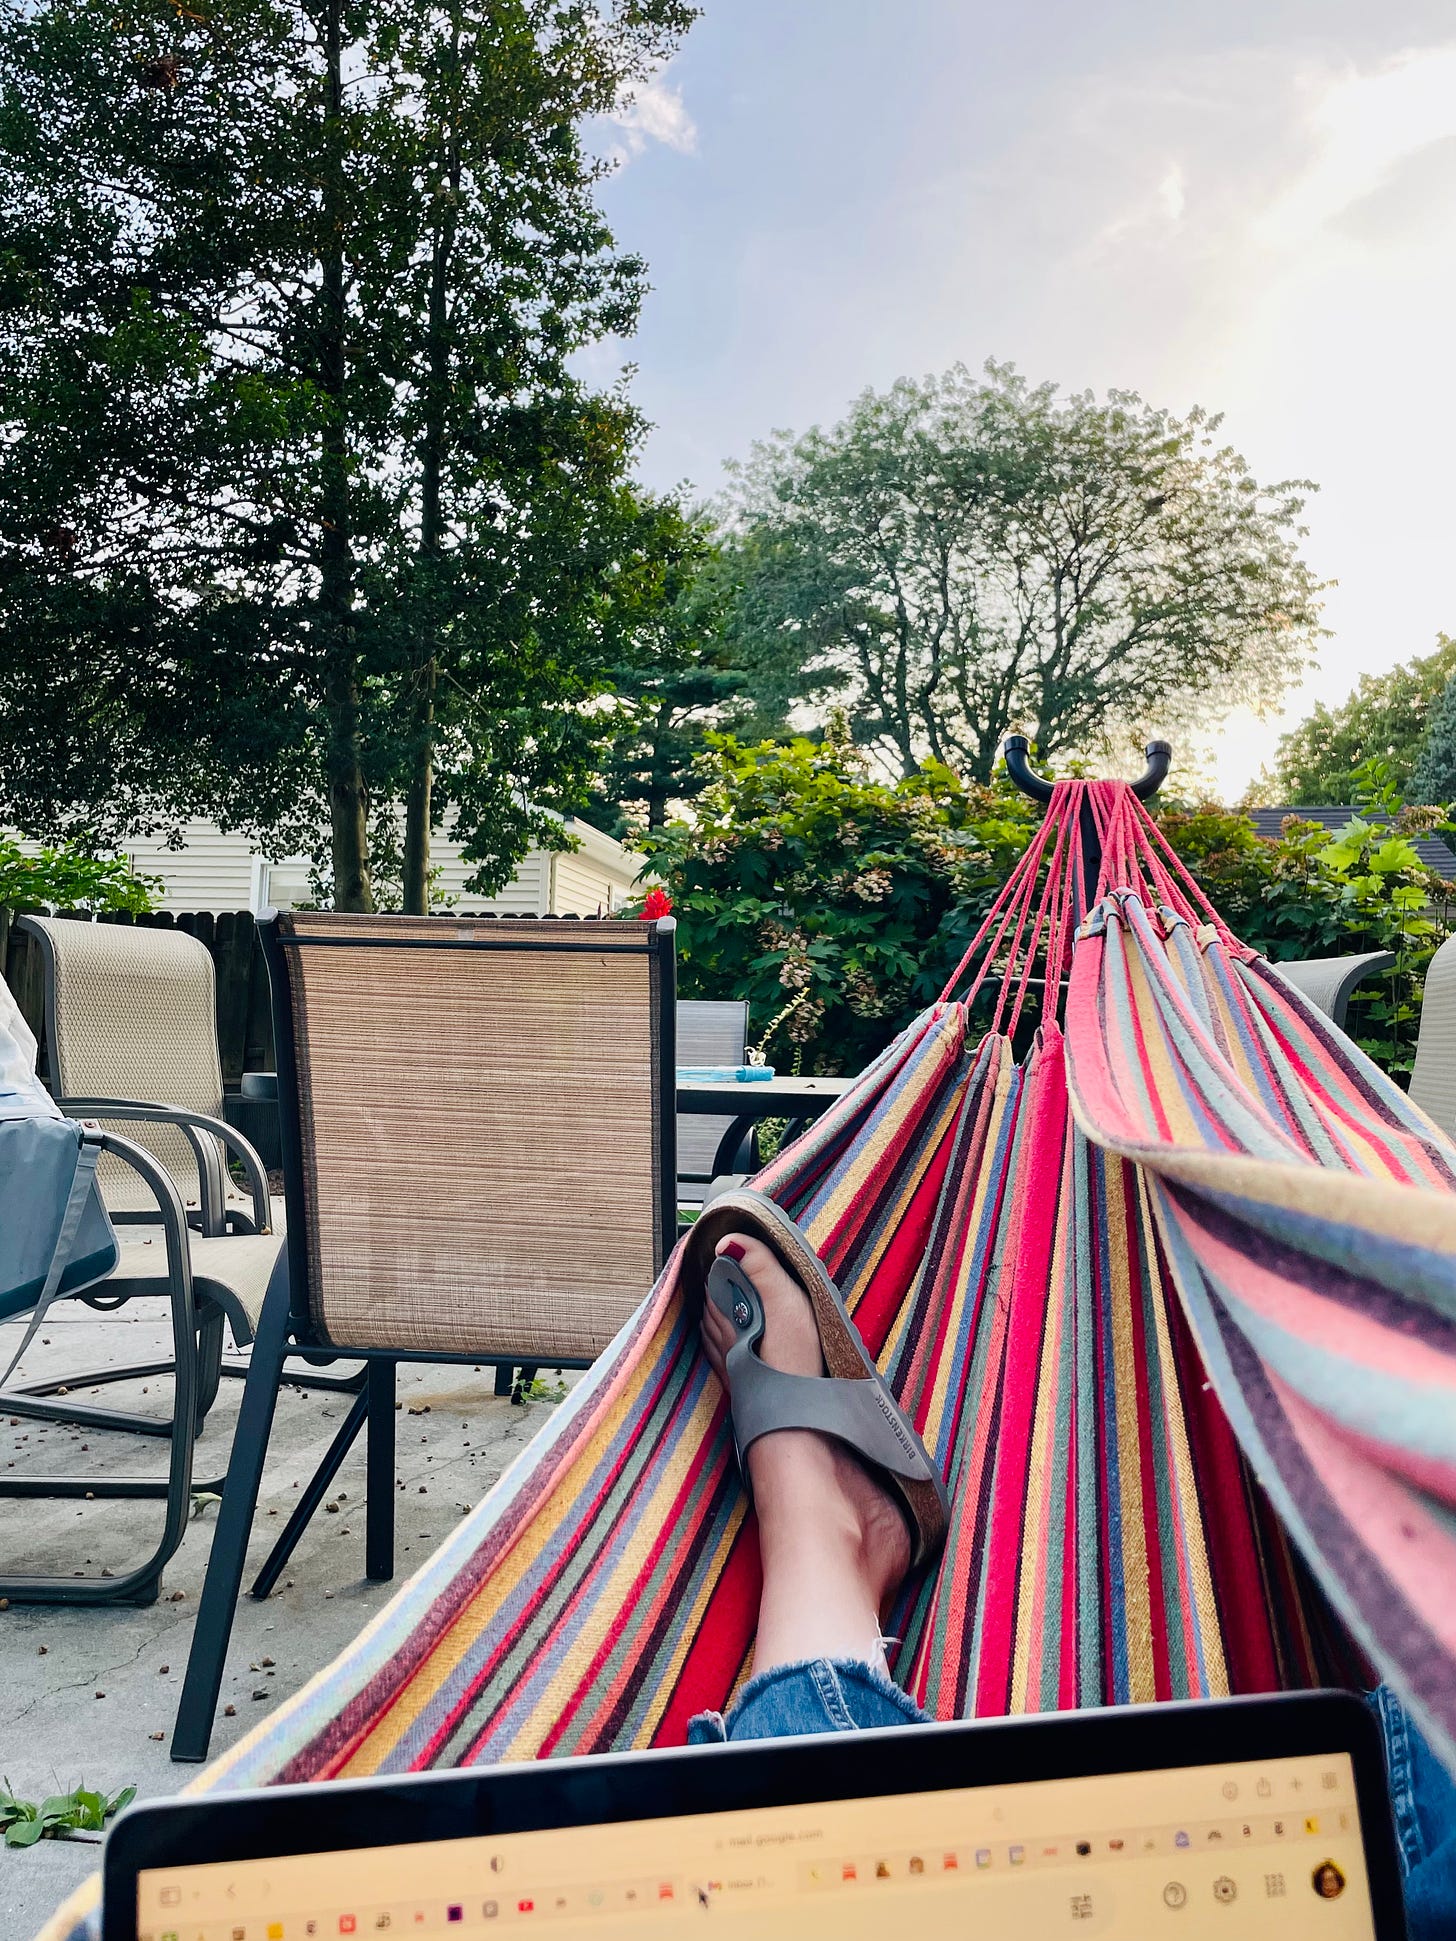 View from a red, yellow, blue, and black striped hammock: A sandaled foot on the hammock, the very top of a laptop, outdoor table and chairs in the background, and trees.